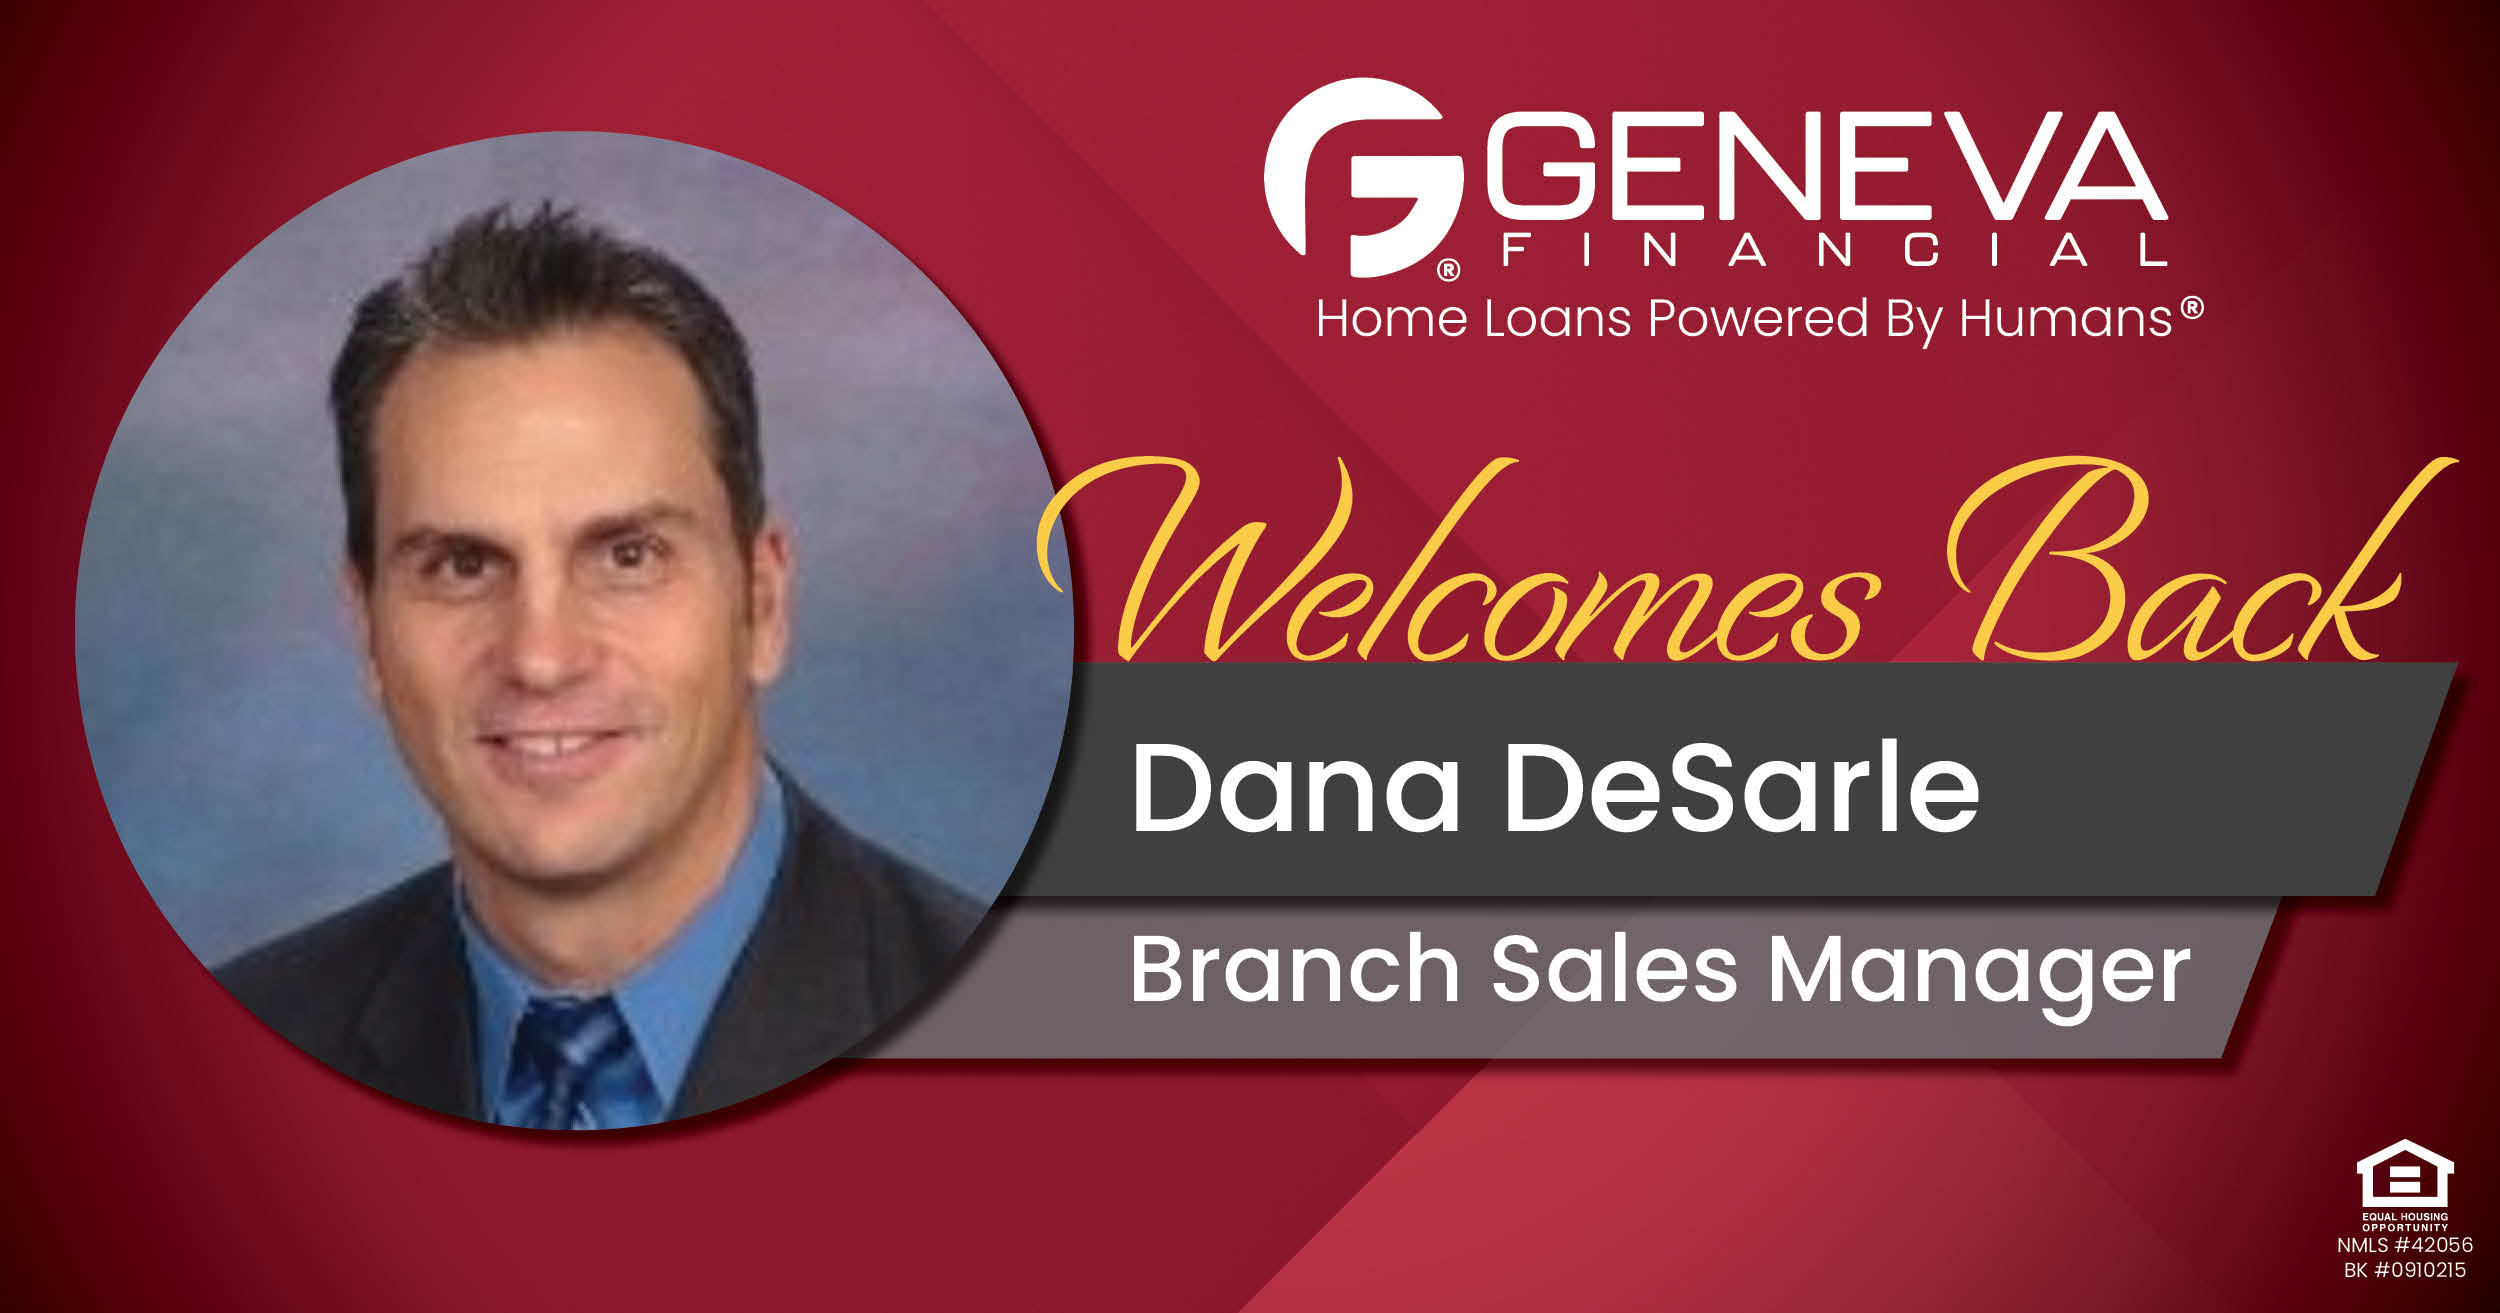 Geneva Financial Welcomes New Branch Sales Manager Dana Desarle to Sparks, Nevada – Home Loans Powered by Humans®.